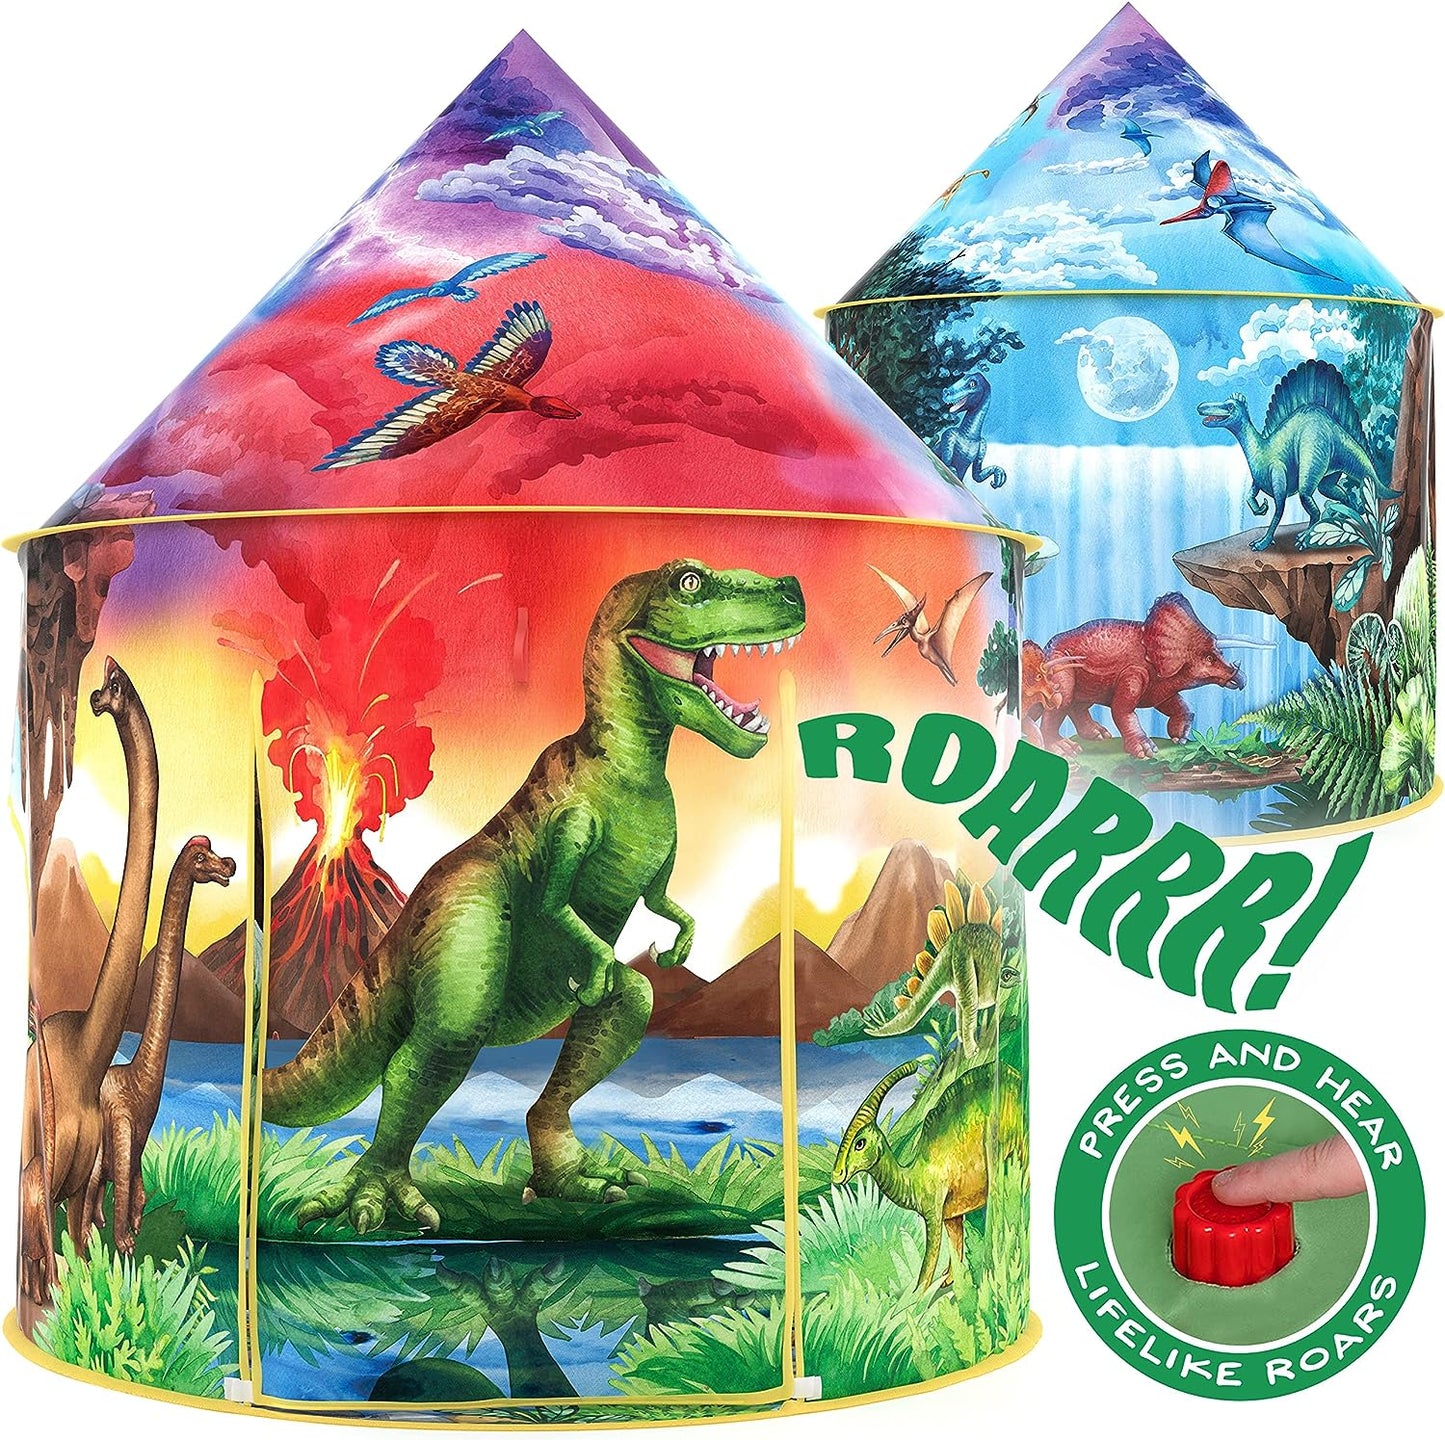 Dinosaur Discovery Kids Tent with Roar Button, Dinosaur Tent